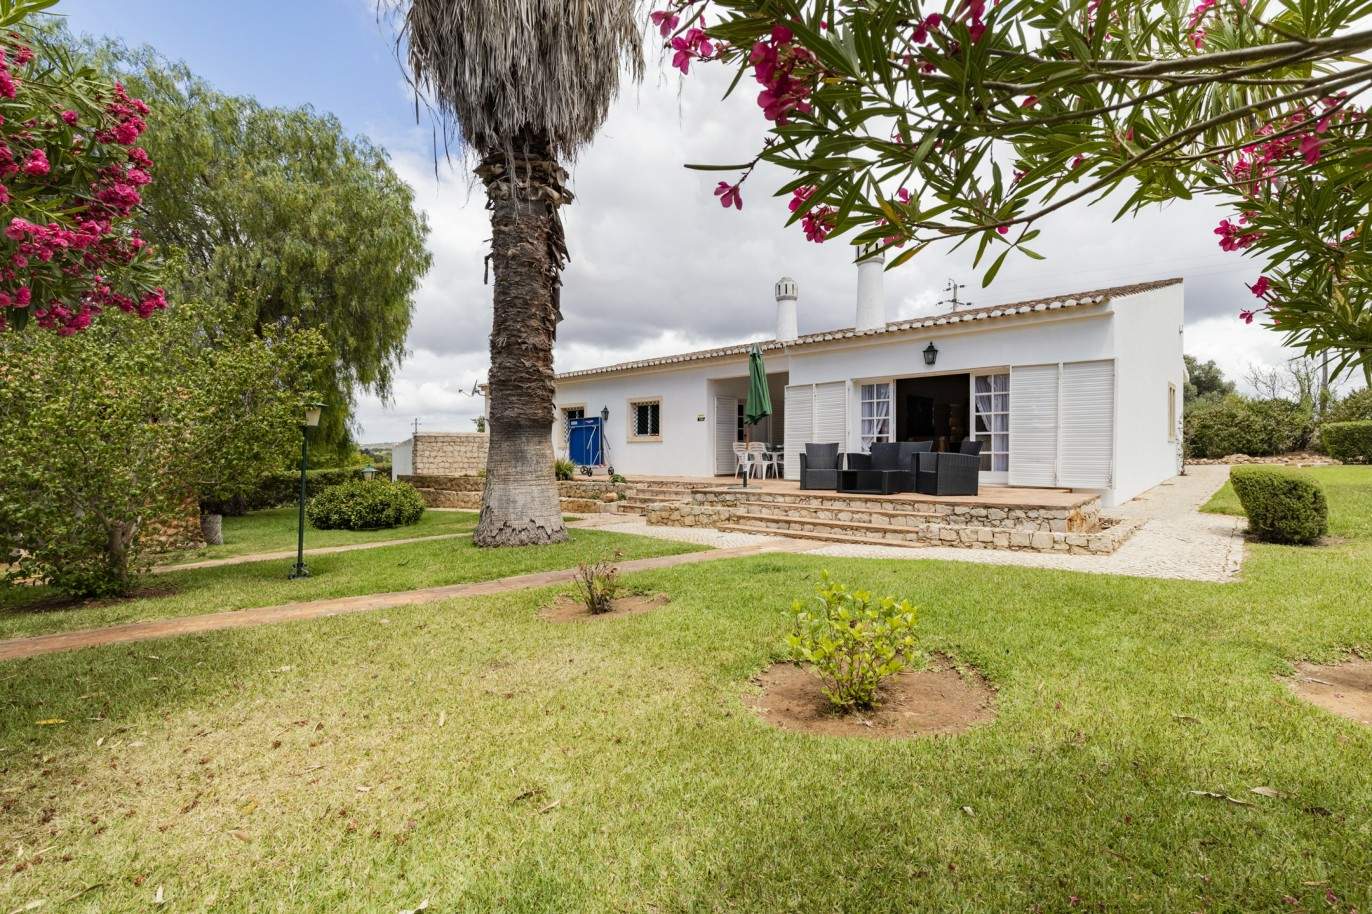 Rustic 5 bedrooms villa with pool and orchard, for sale in Pêra, Algarve_201834